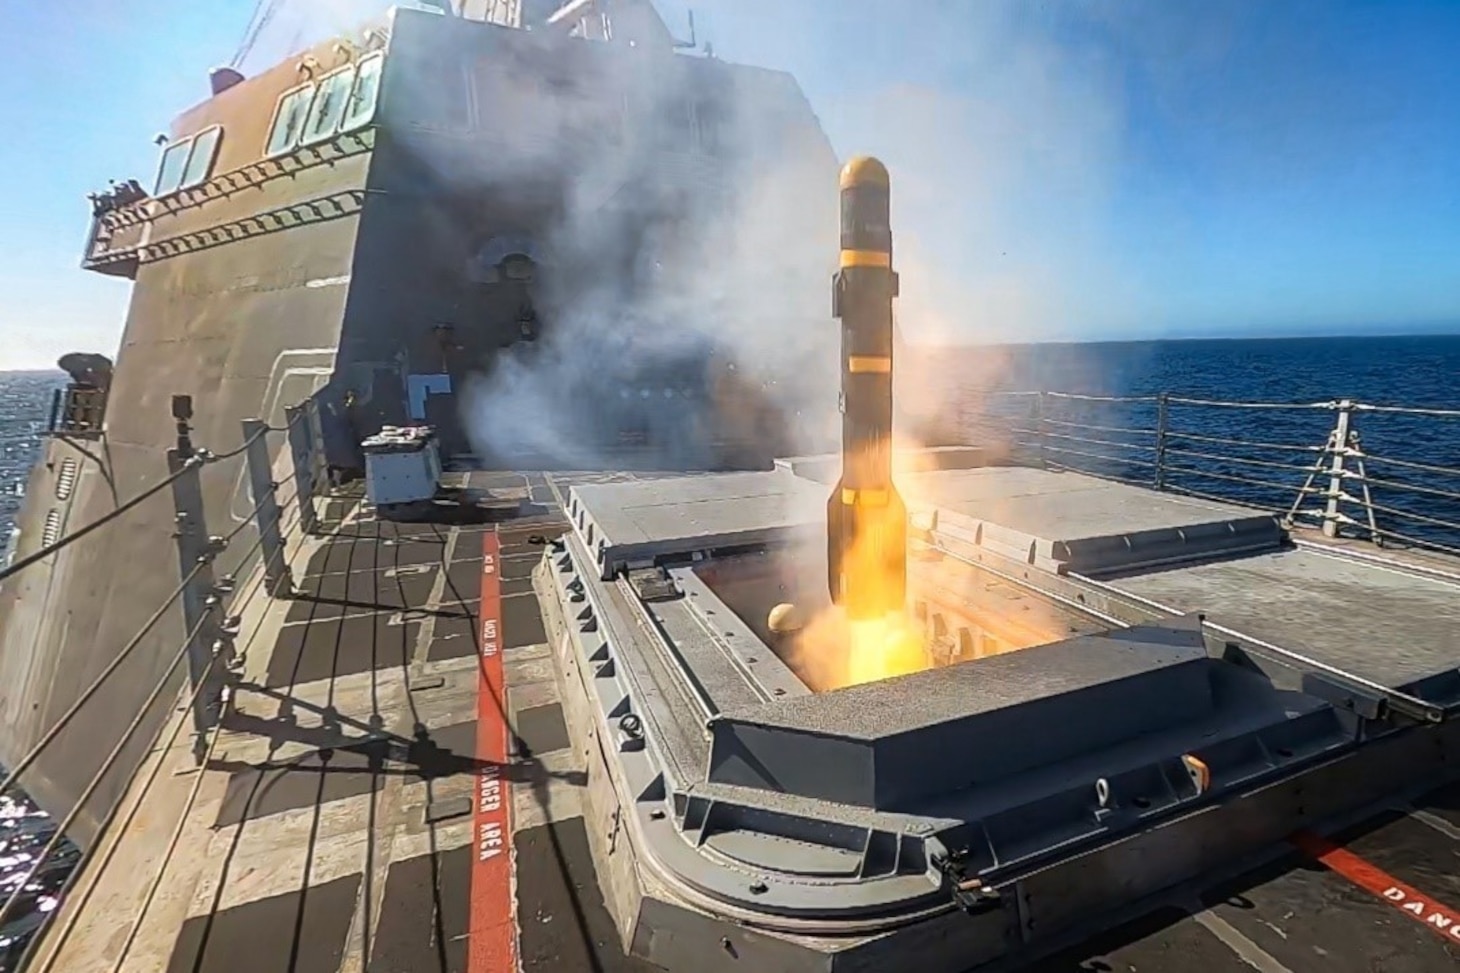 An AGM-114L Longbow Hellfire missile launches from the Surface-To-Surface Missile Module (SSMM) aboard Independence-variant Littoral Combat Ship USS Montgomery (LCS 8).